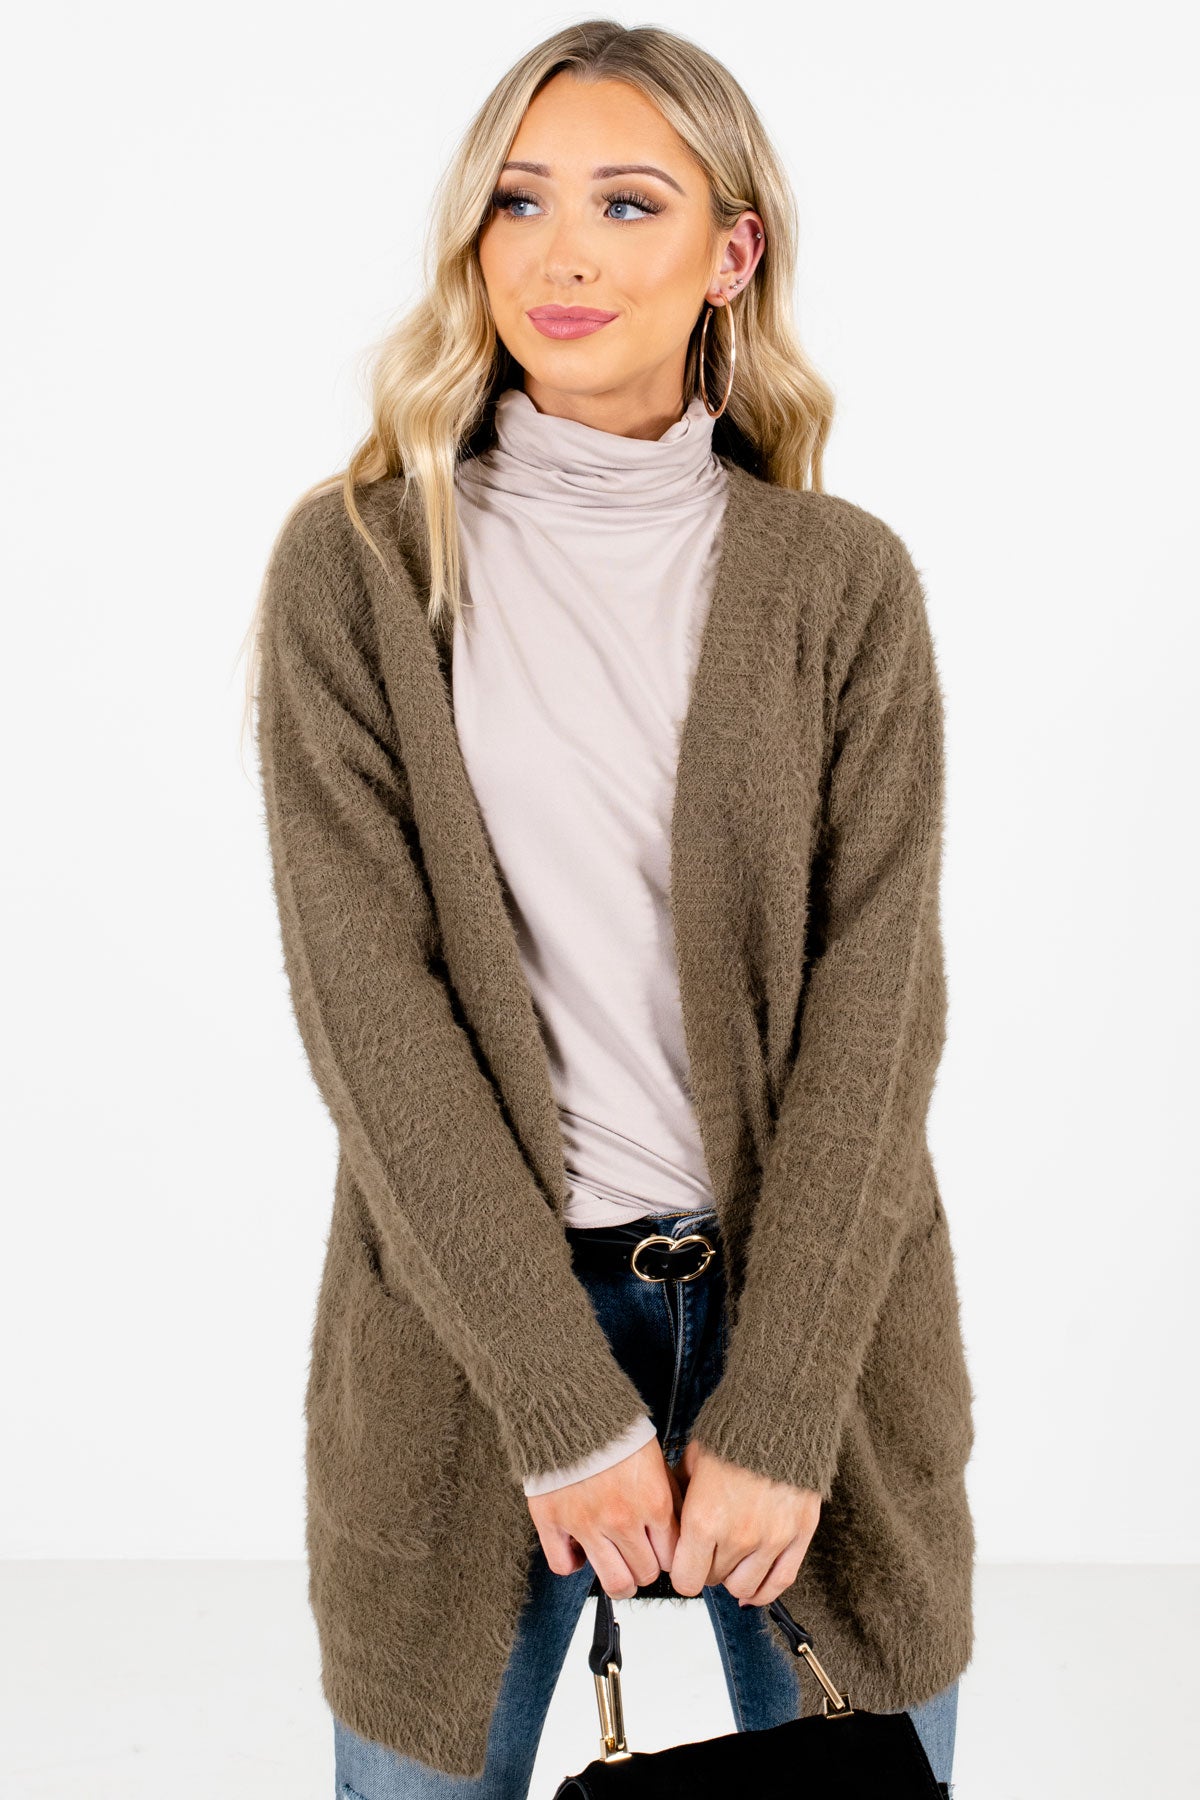 Olive Green Cute and Comfortable Boutique Cardigans for Women